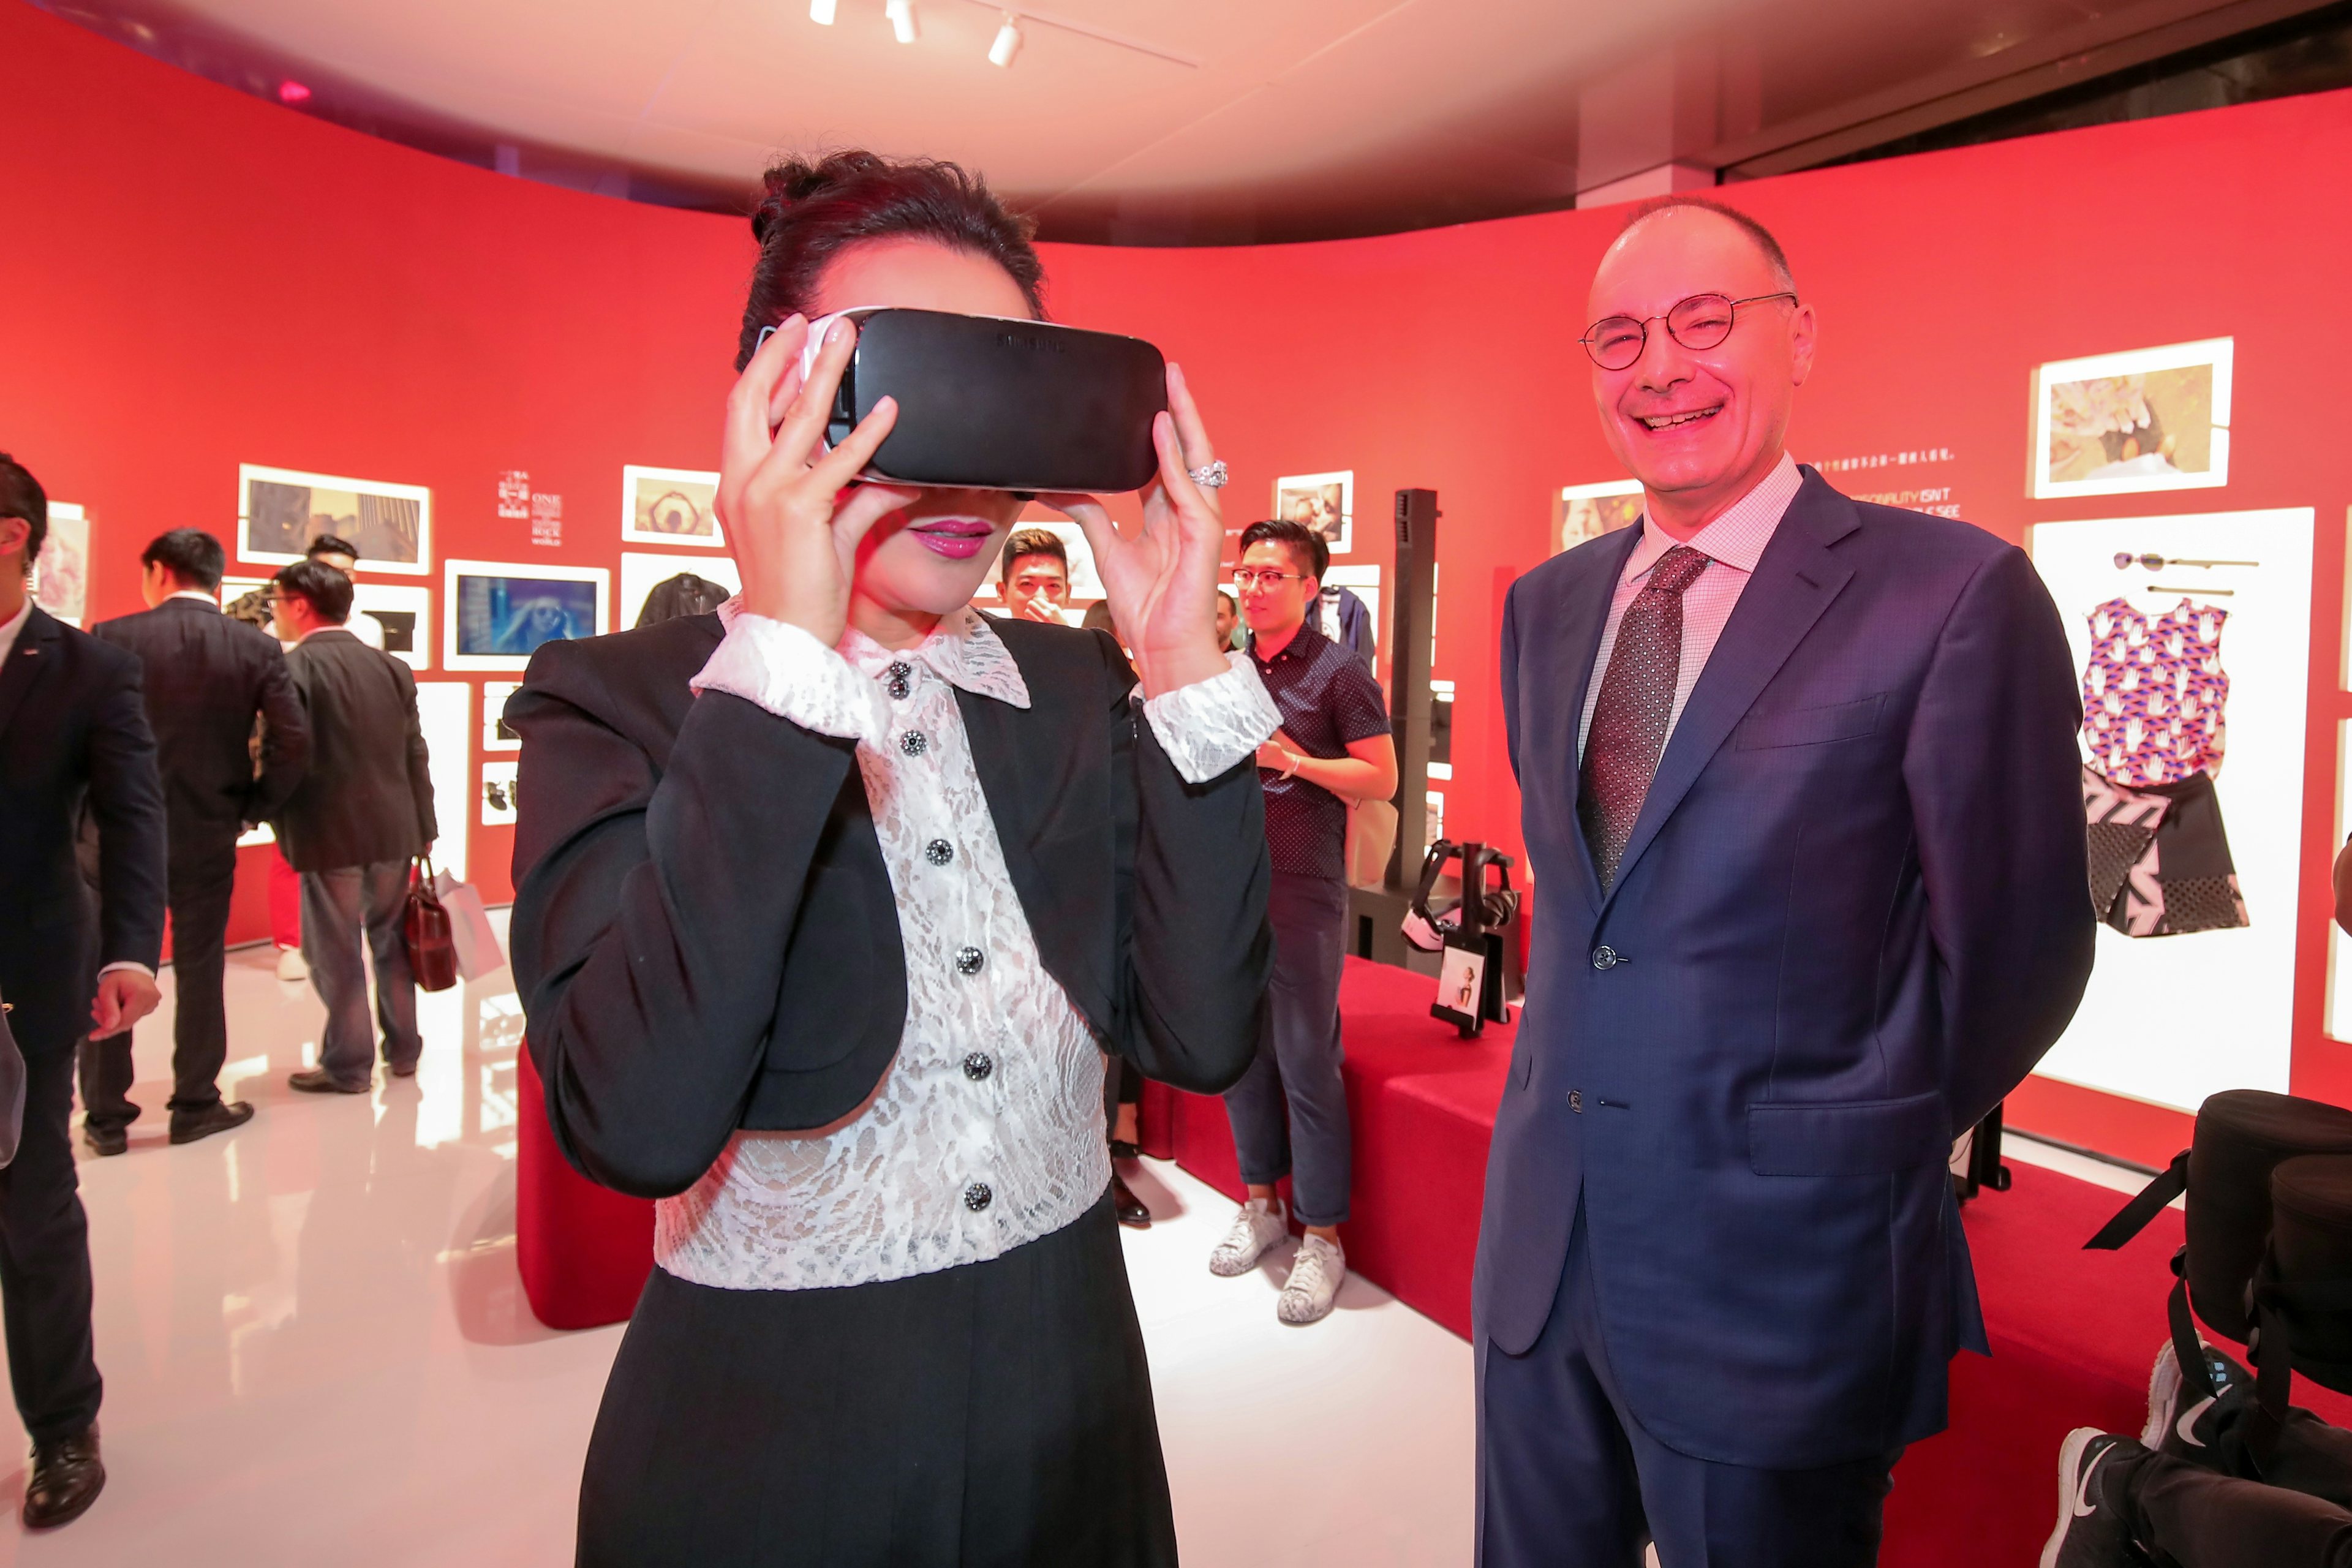 Carina Lau (L) tests out a VR headset with Mei.com CEO Thibault Villet (R) at Mei.com's launch event for its 916 online shopping festival in Shanghai on Tuesday, September 13, 2016. (Courtesy Photo)